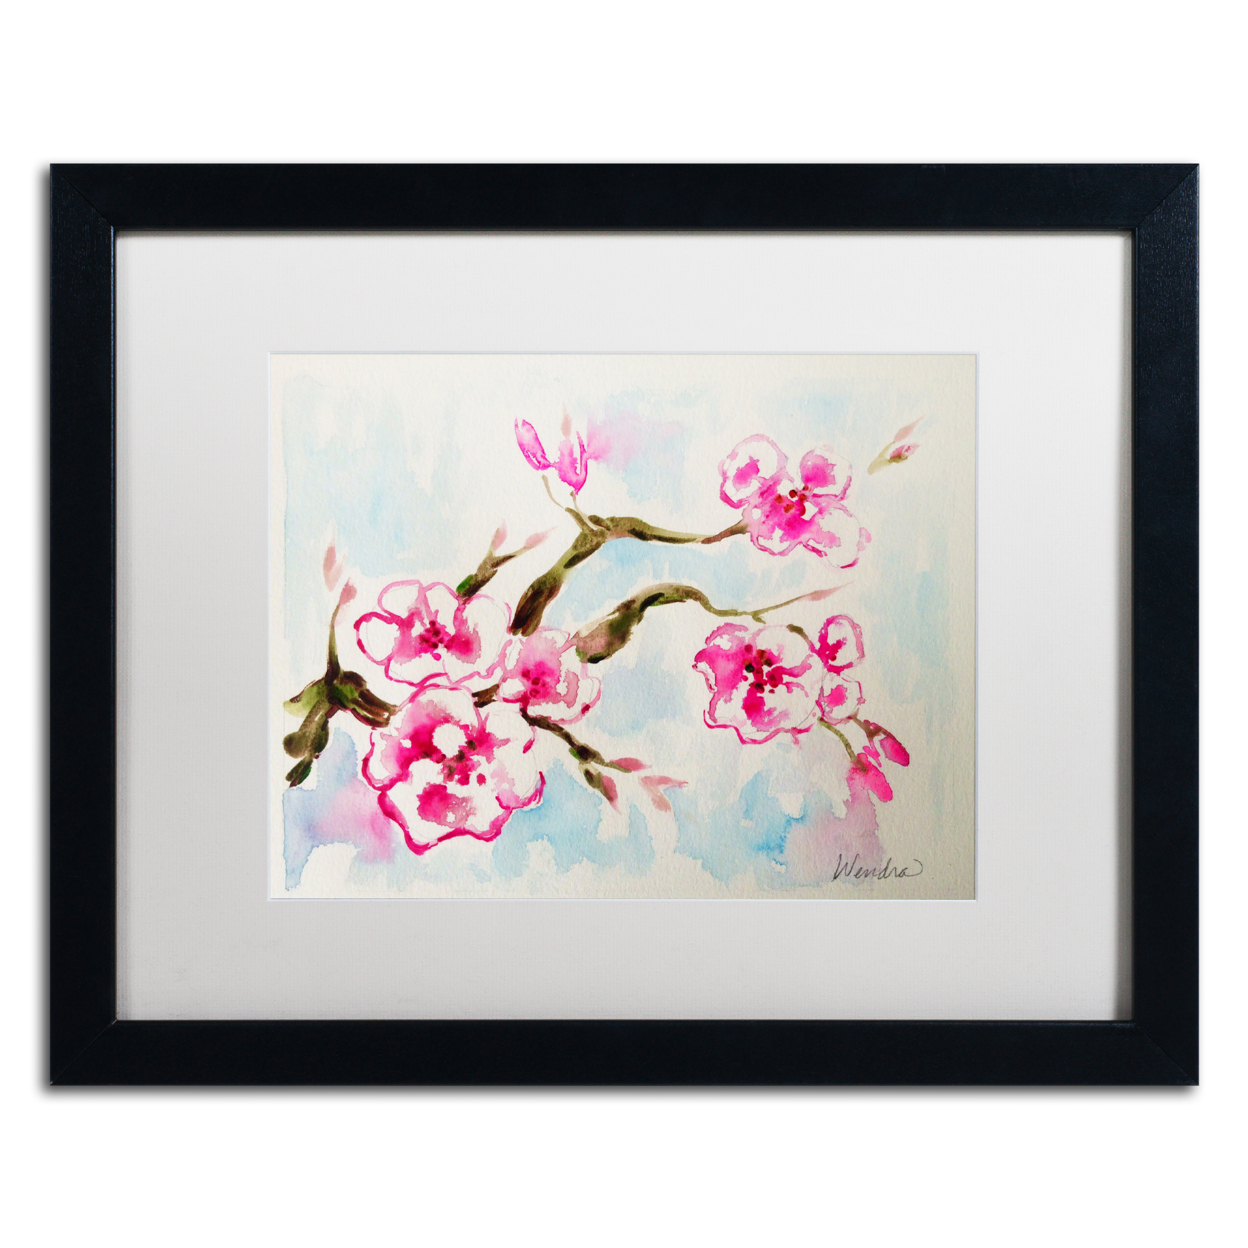 Wendra 'Cherry Blossom' Black Wooden Framed Art 18 X 22 Inches